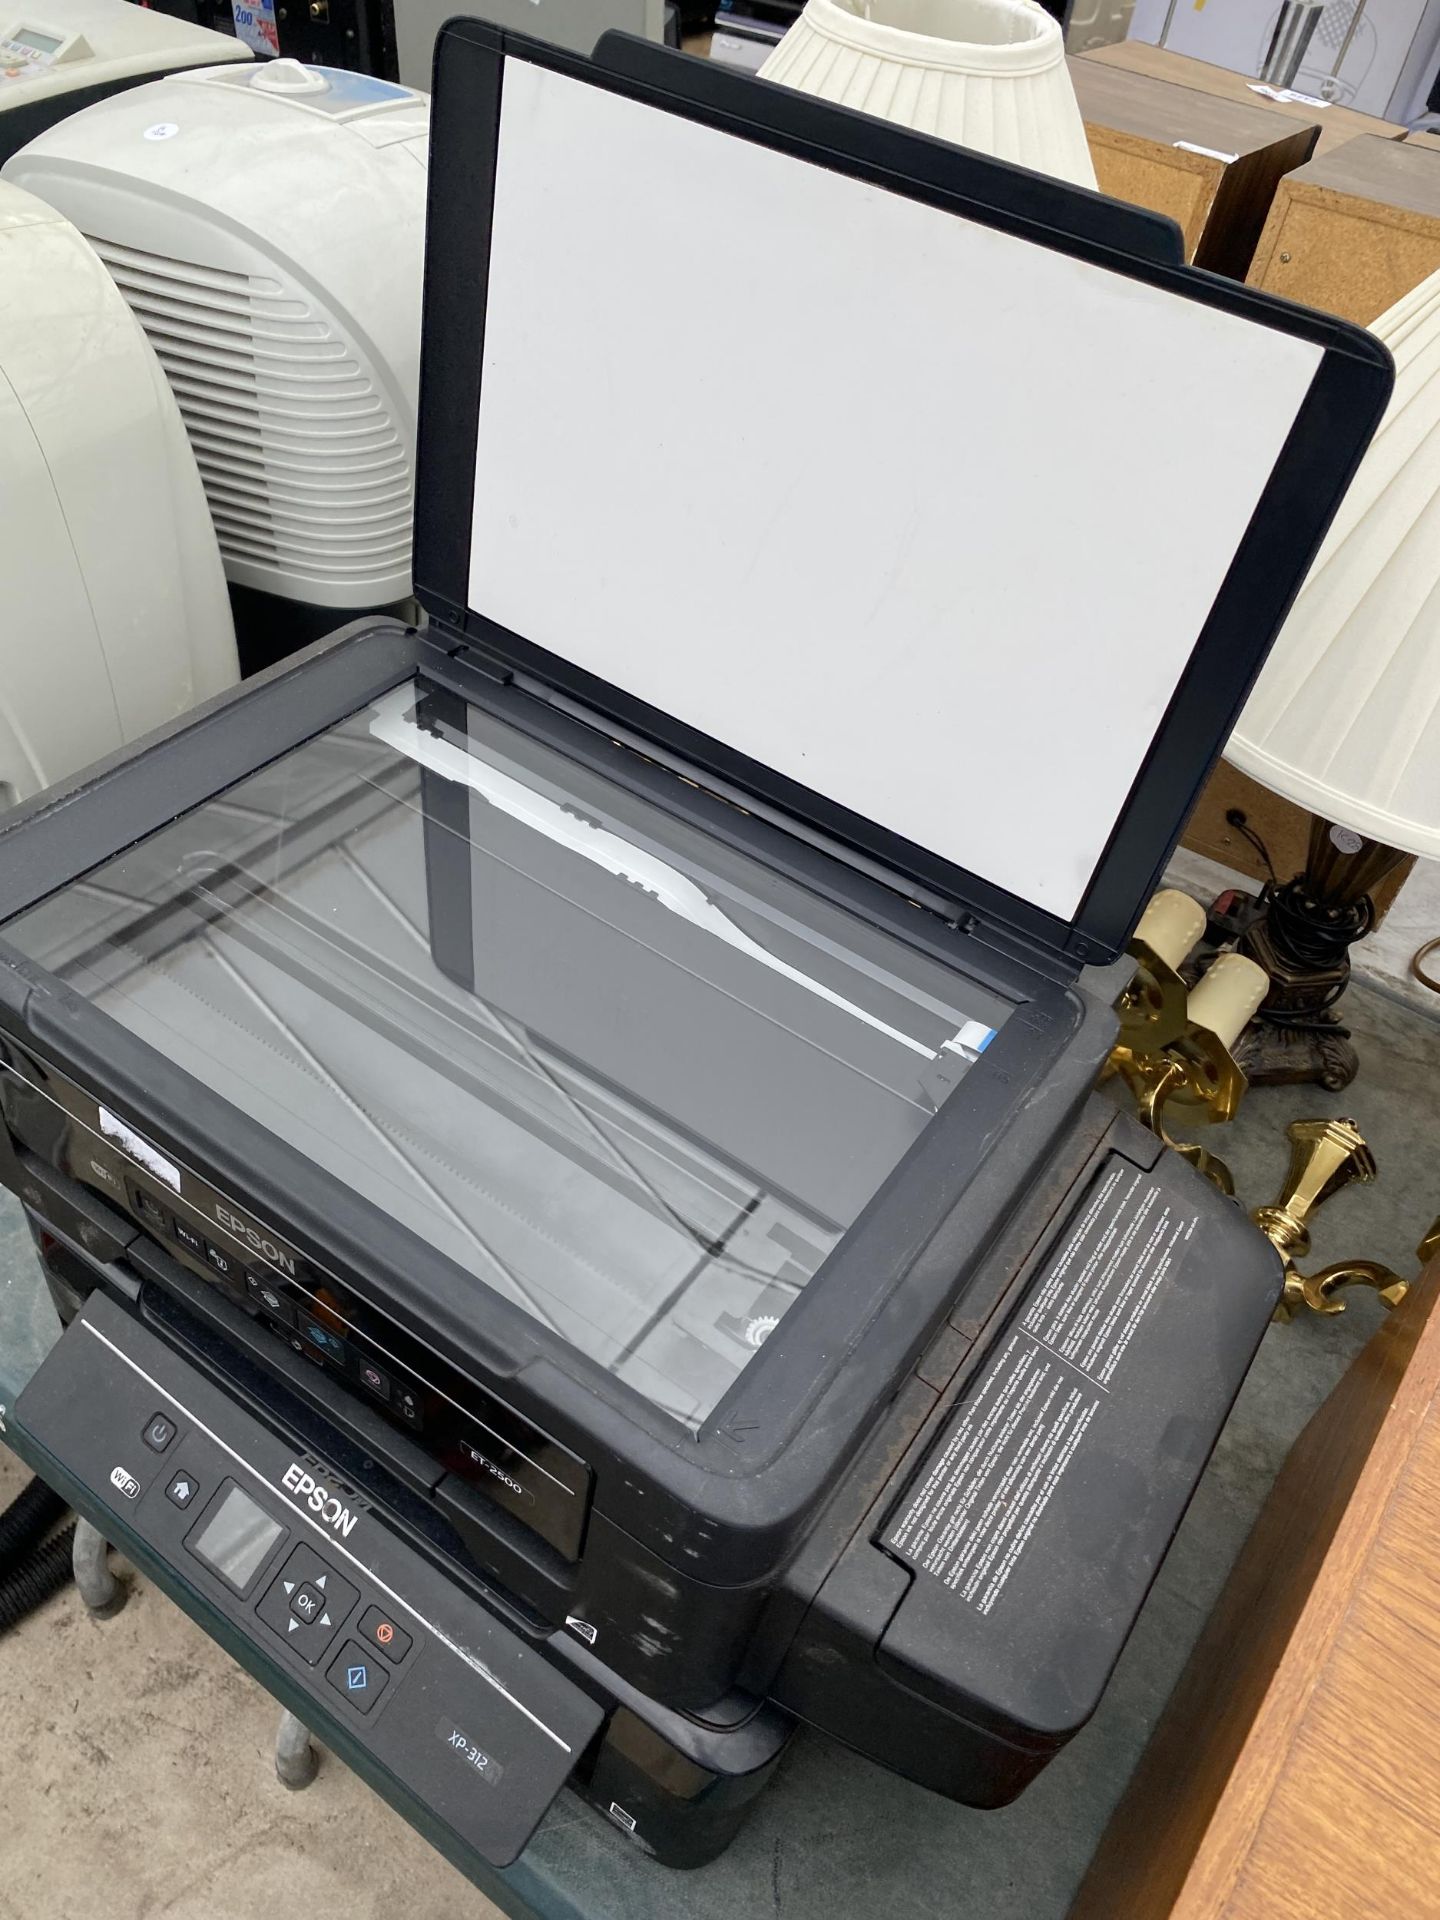 AN EPSON ET-2500 WIFI PRINTER TOGTHER WITH EPSON XP-312 PRINTER - Image 3 of 3